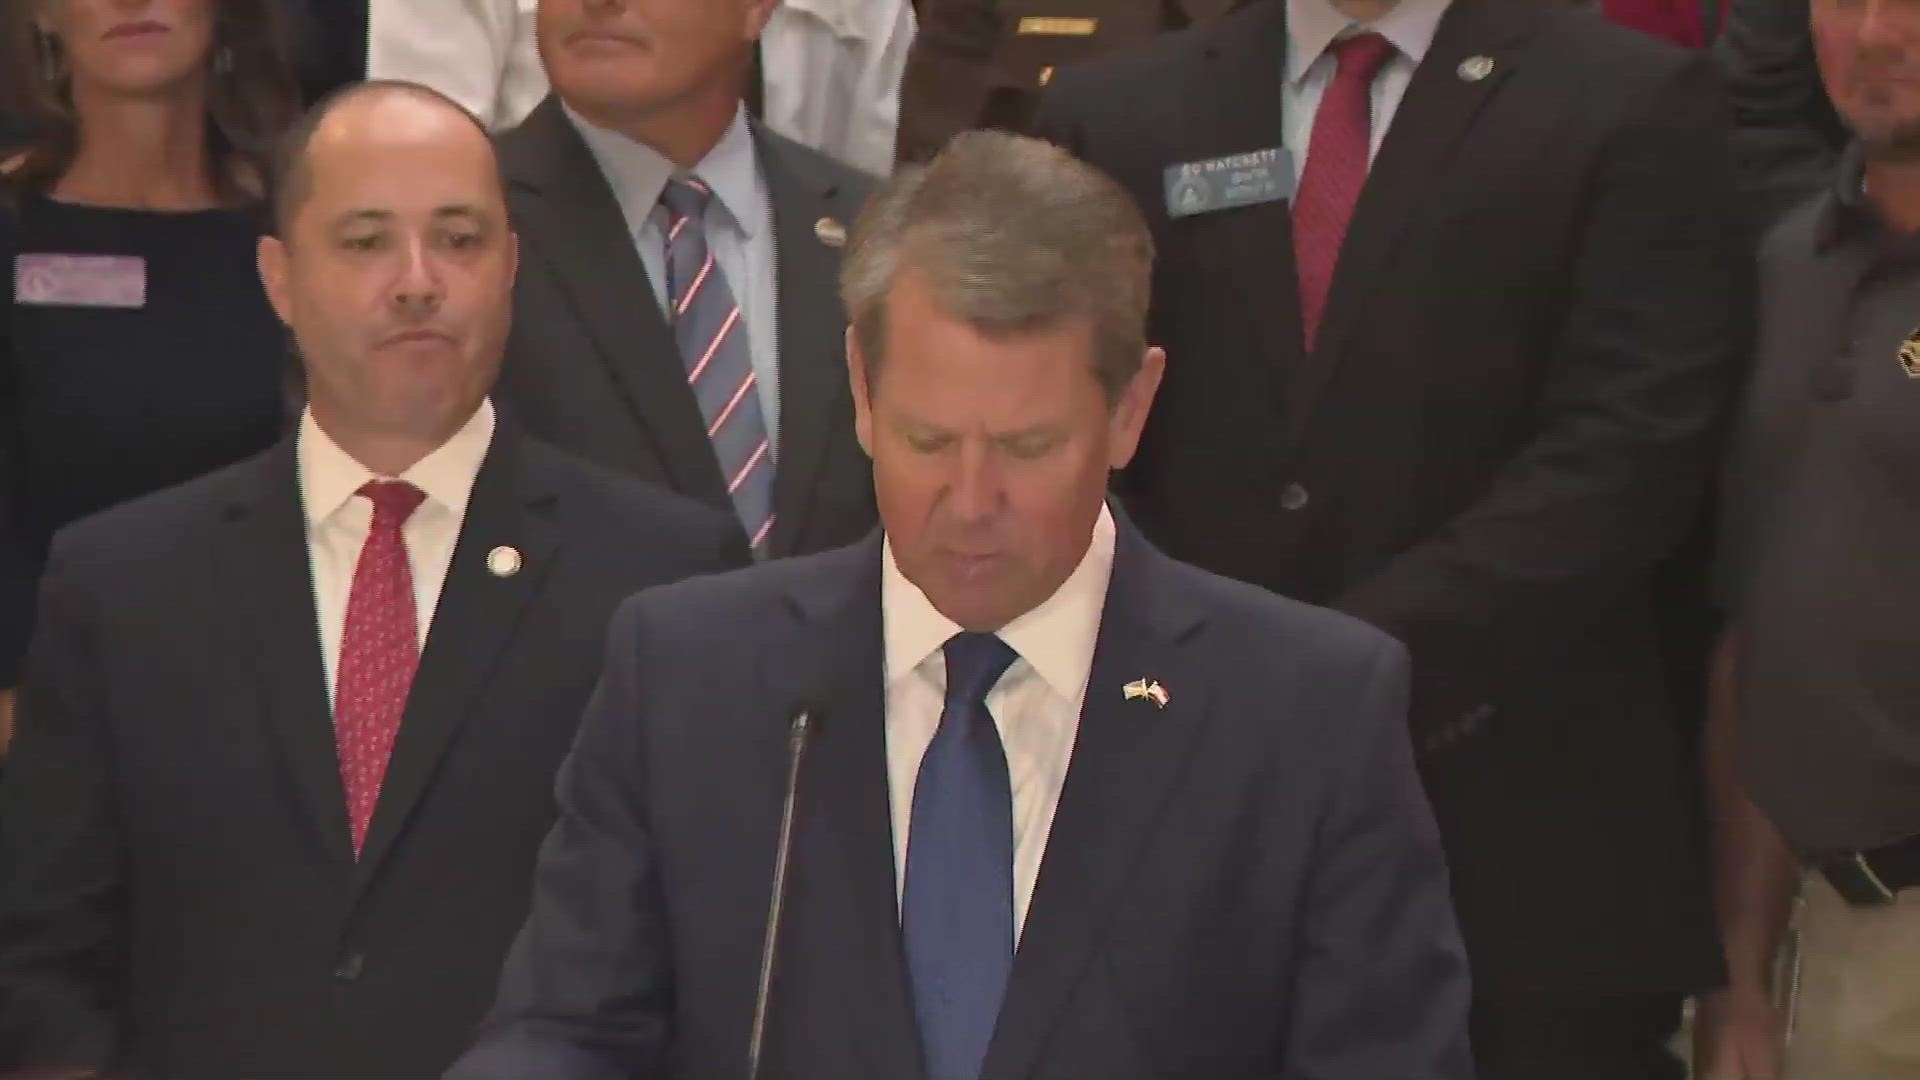 Gov. Kemp says the bonus is for all public safety, law enforcement and first responders, including school officers, 911 operators, and others.